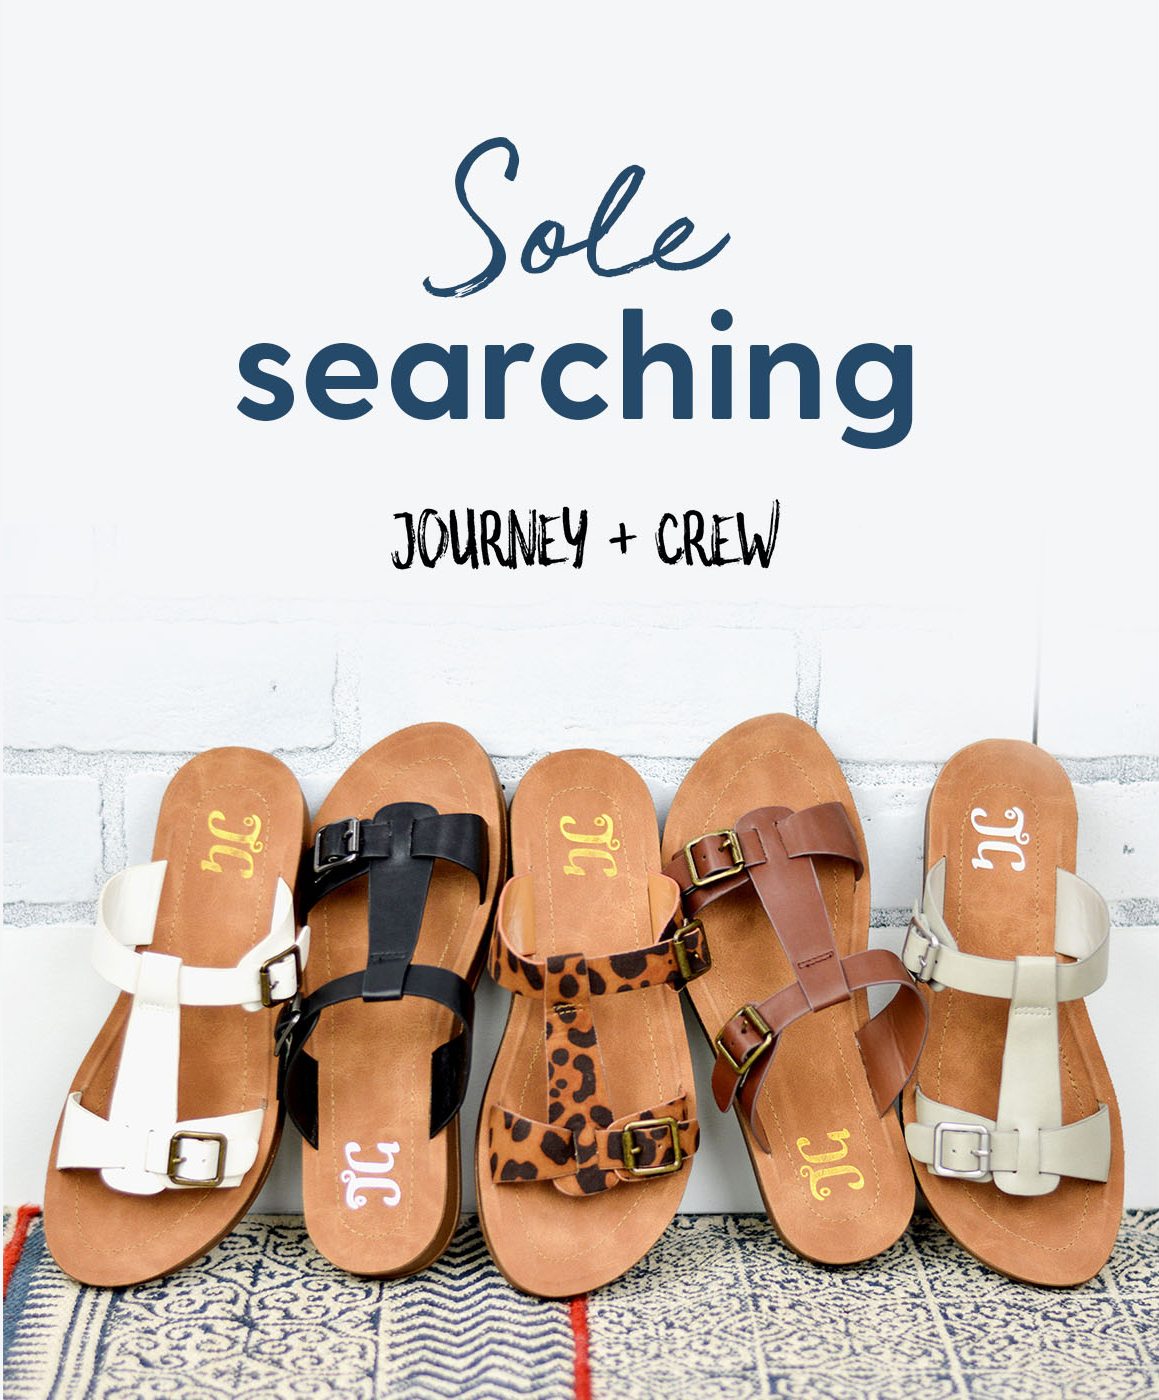 Sole searching with Journey + Crew